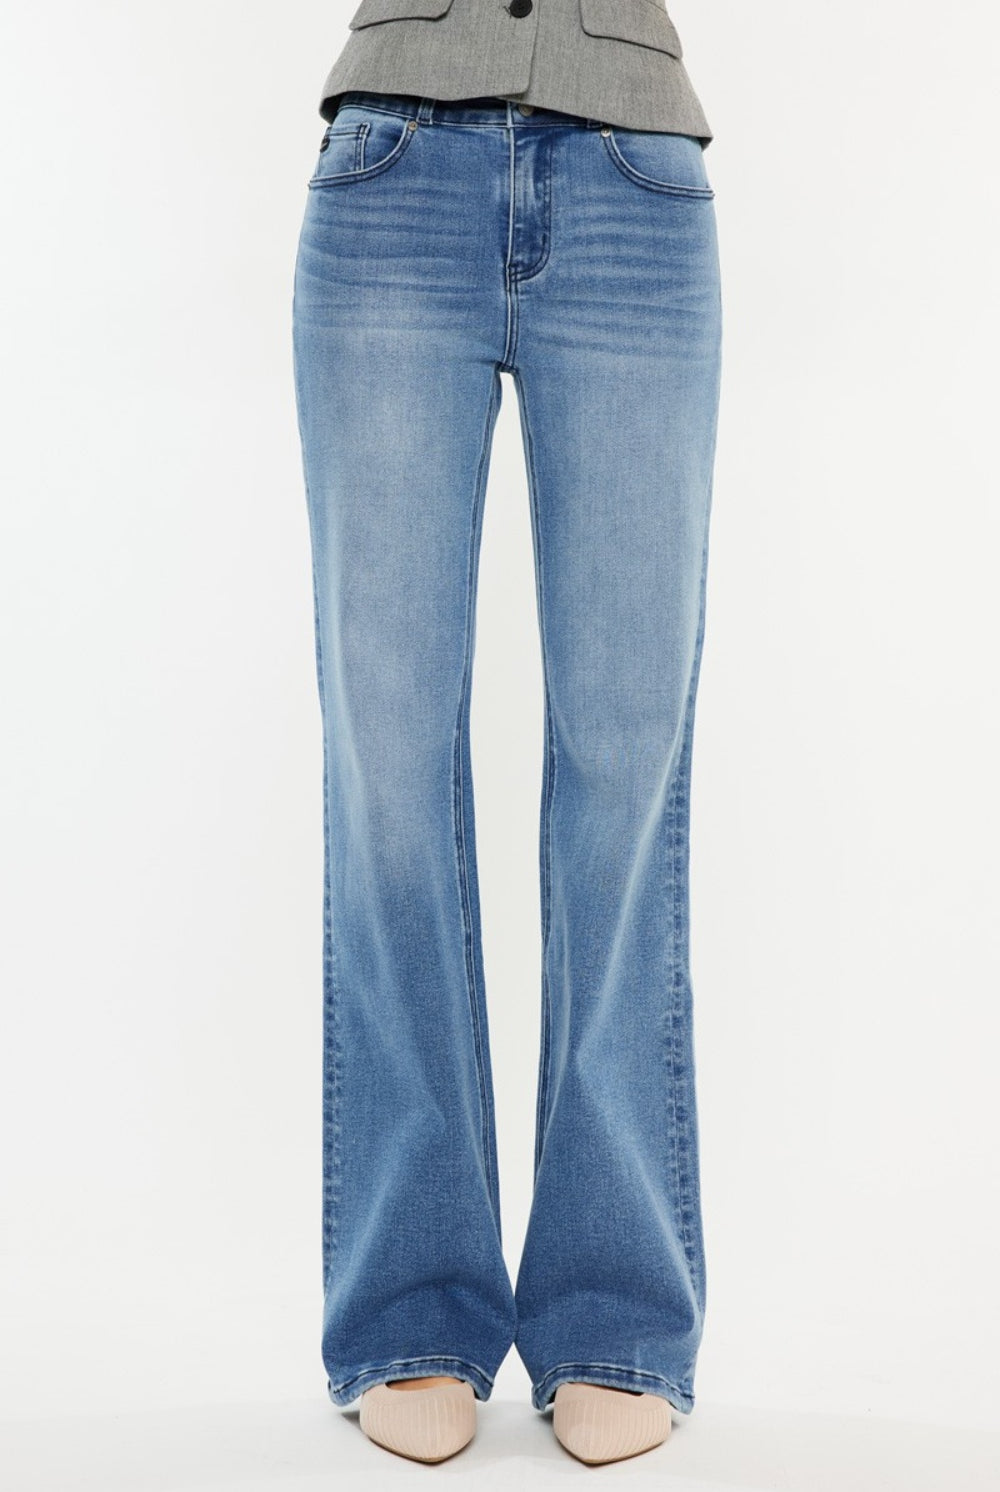 Kancan Ultra High Rise Cat's Whiskers Jeans-Krush Kandy, Women's Online Fashion Boutique Located in Phoenix, Arizona (Scottsdale Area)